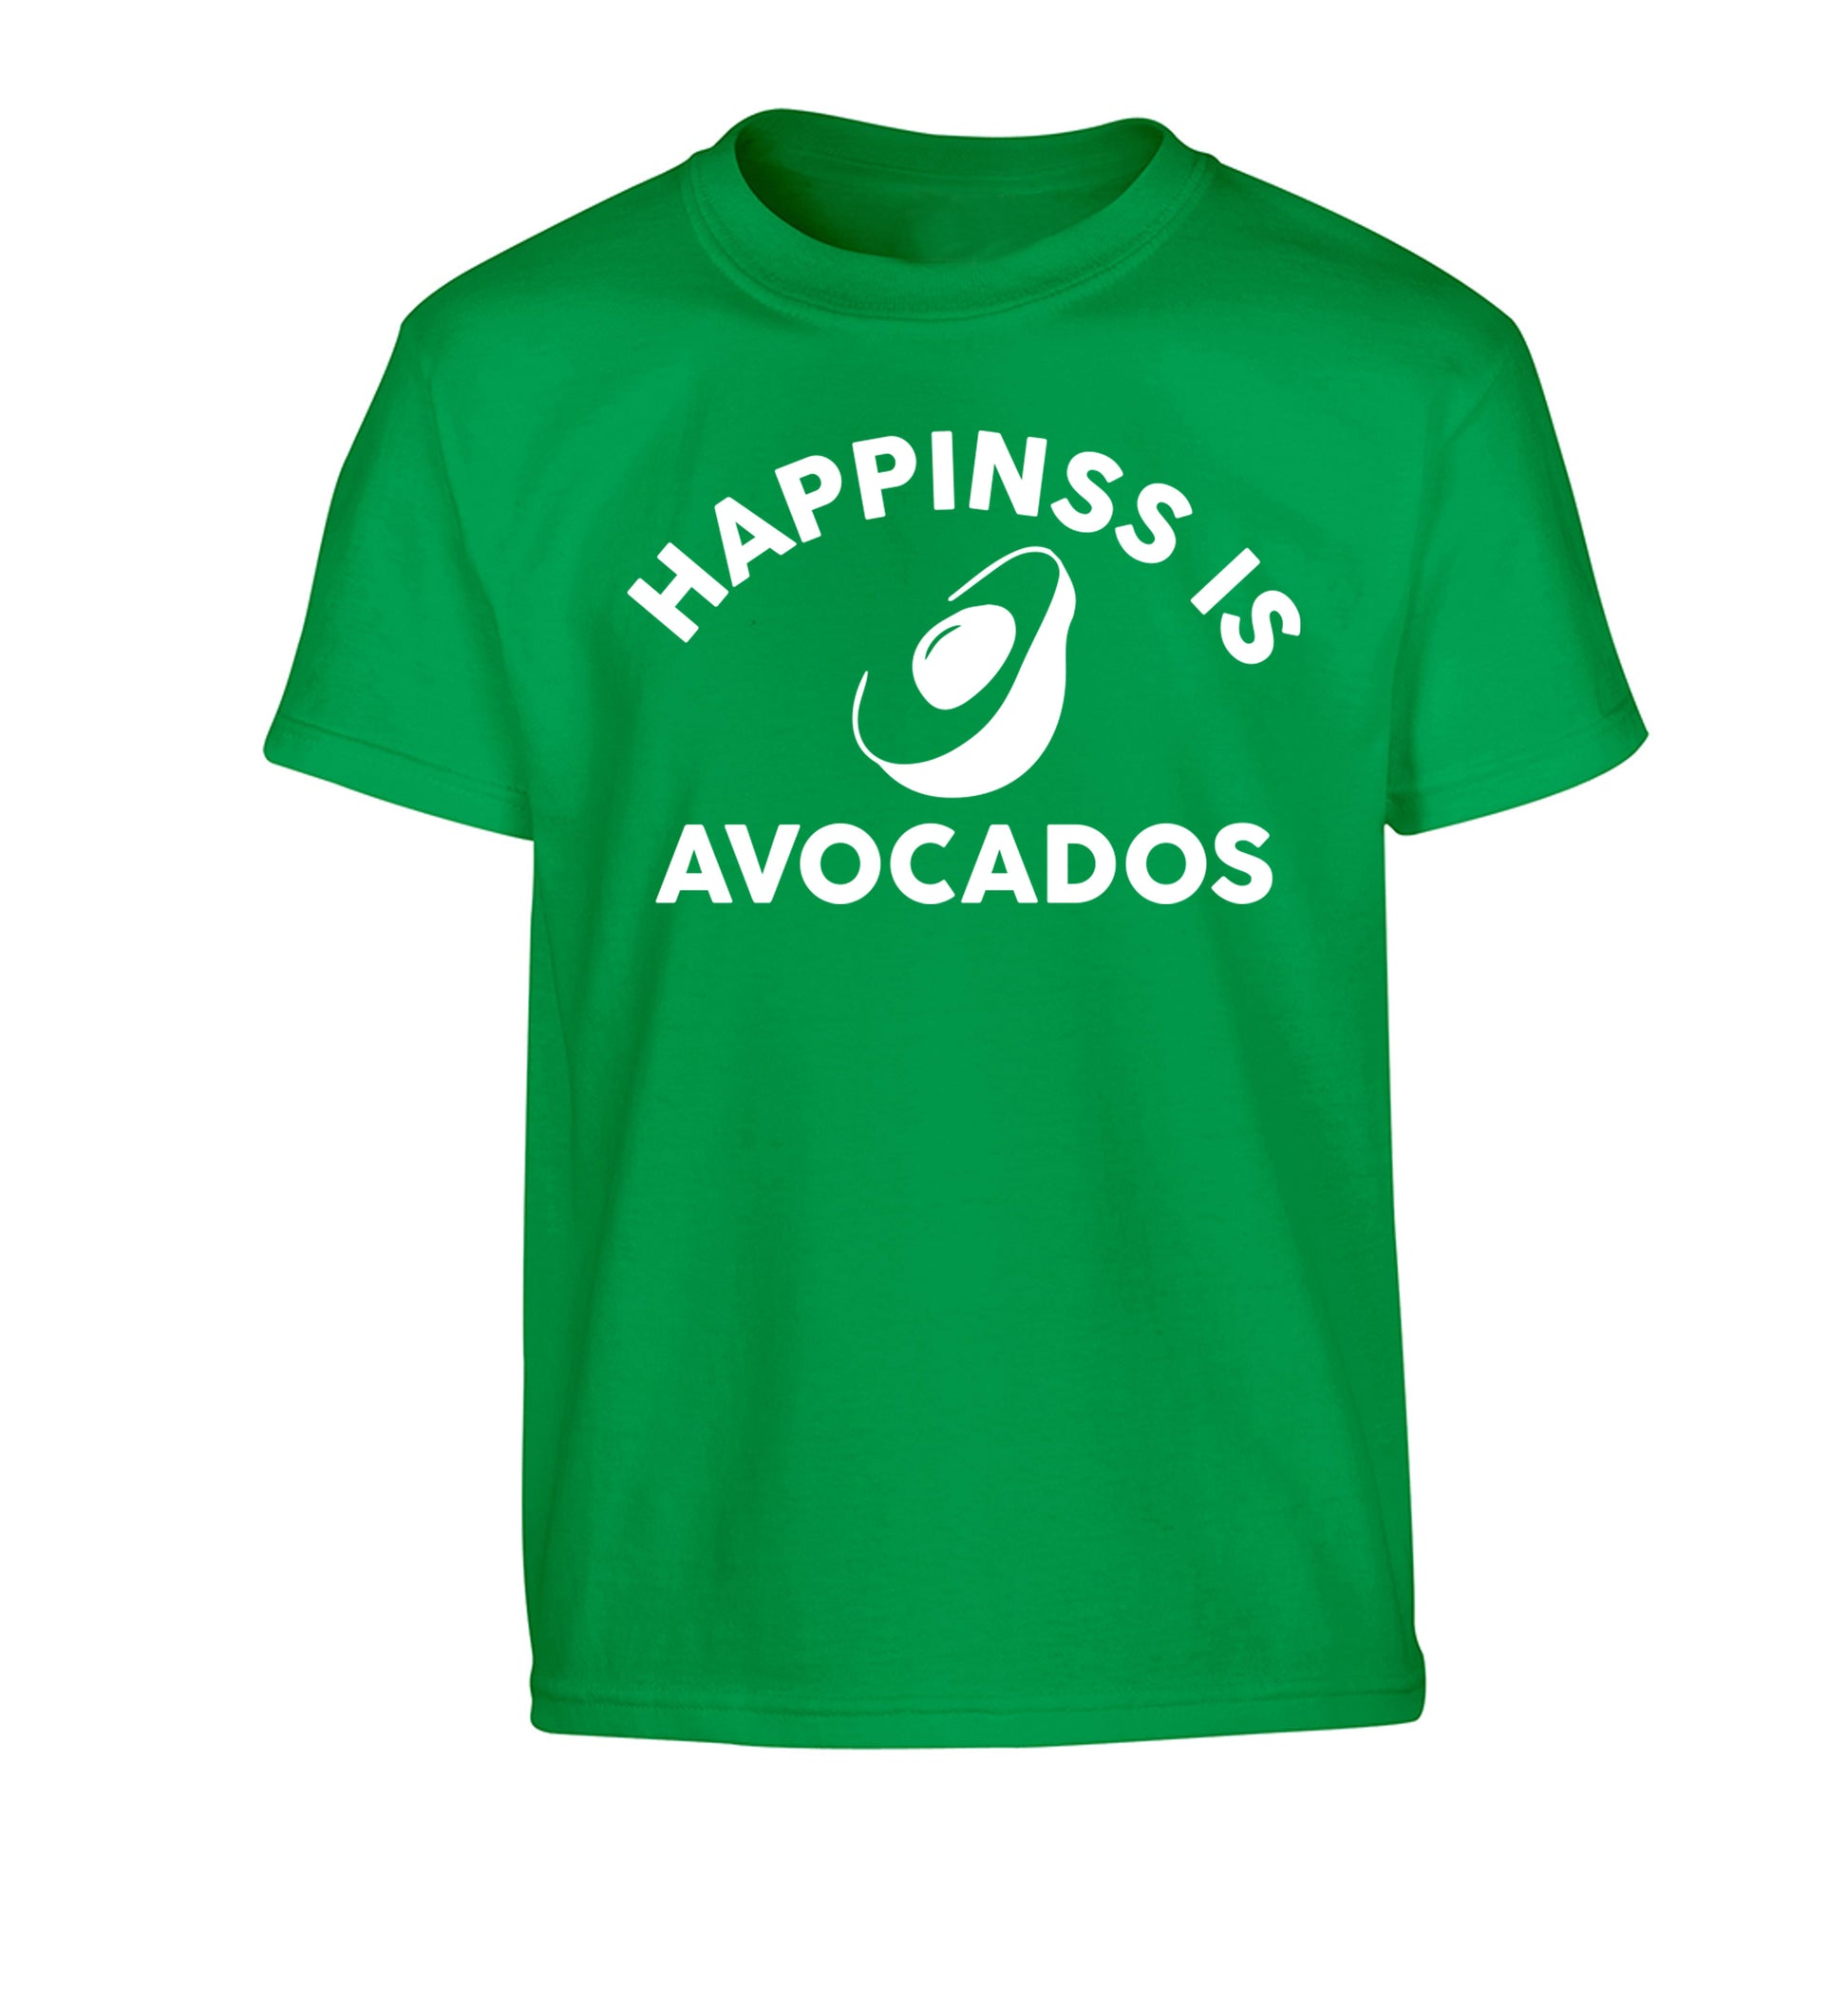 Happiness is avocados Children's green Tshirt 12-14 Years